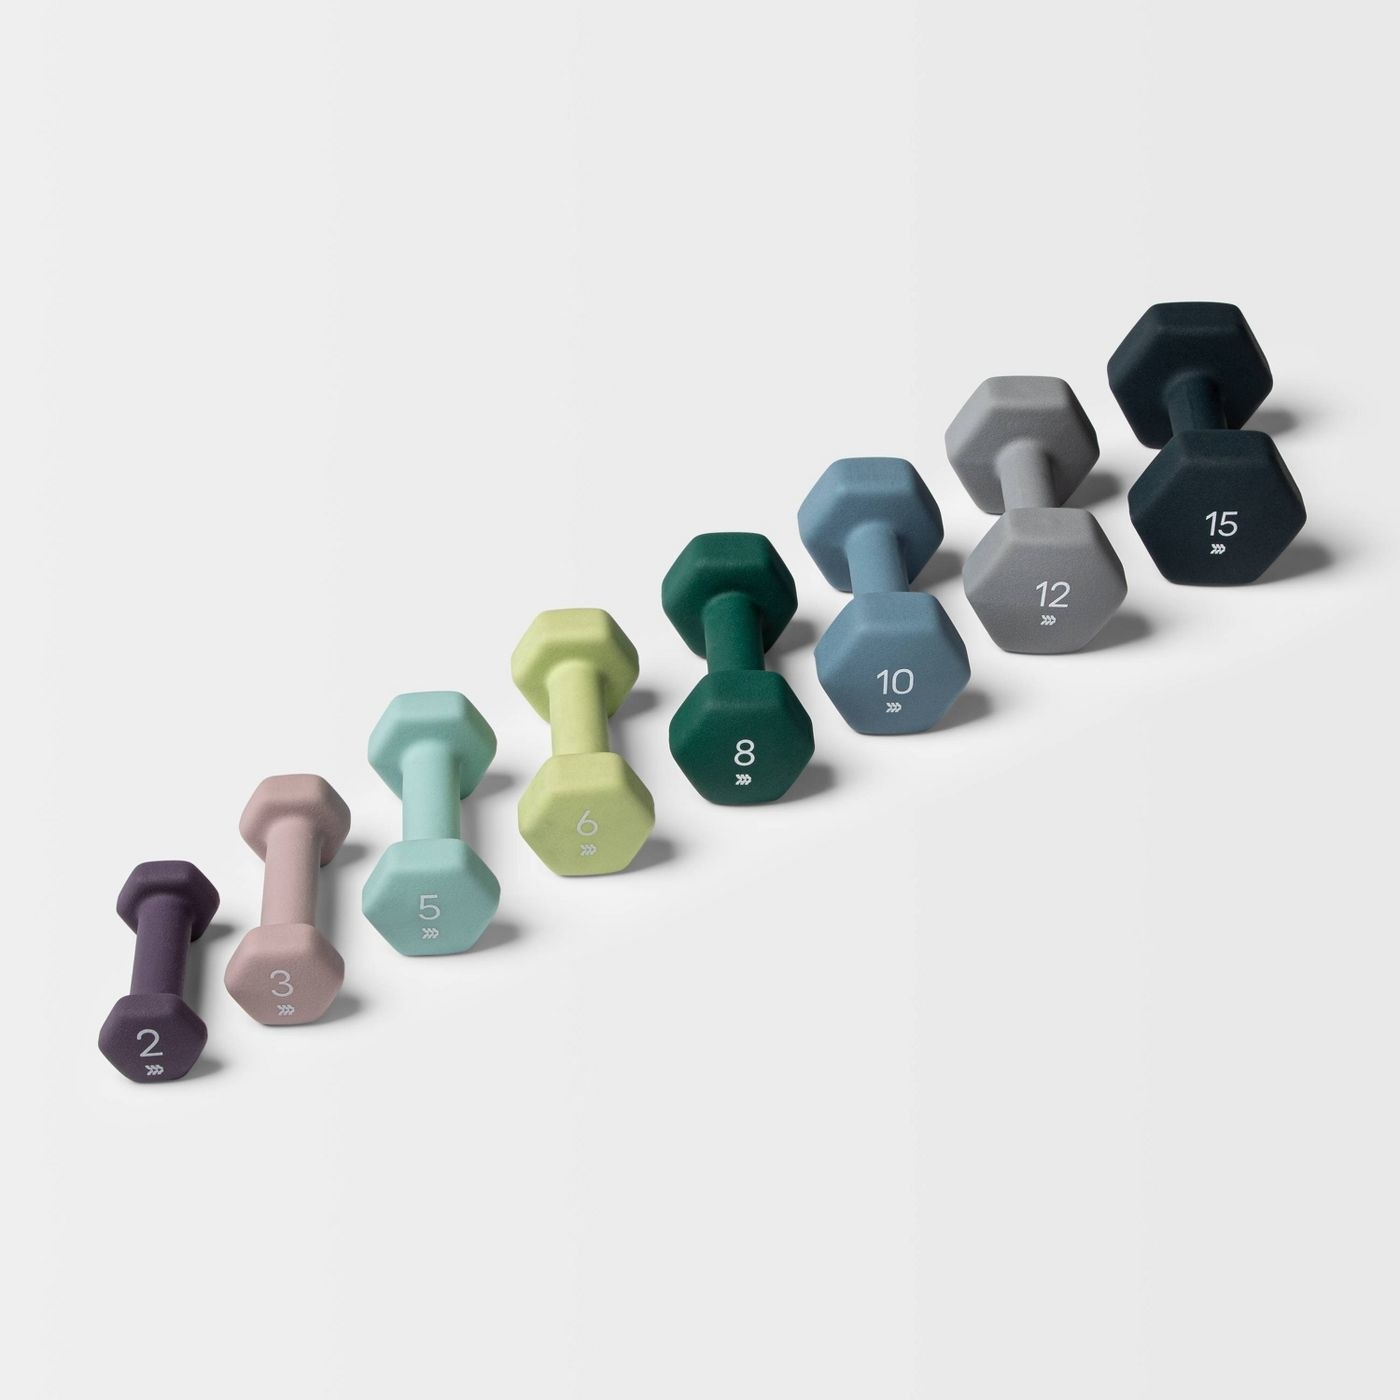 Dumbbells ranging in colors and weights, from 2 pounds to 15 pounds